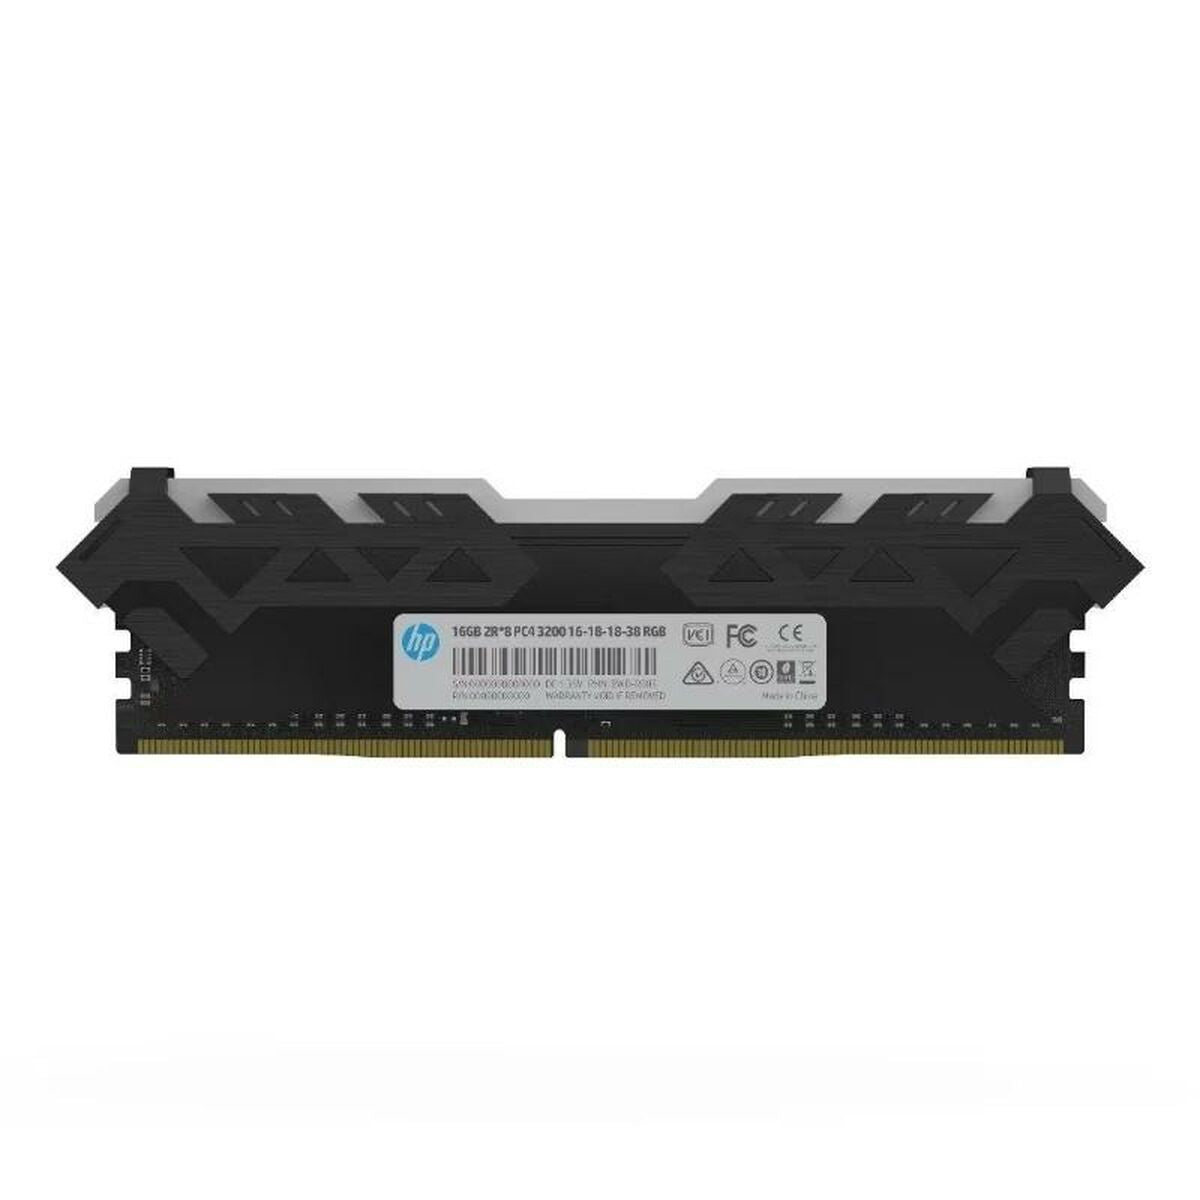 RAM Memory HP V8  16 GB CL16, HP, Computing, Components, ram-memory-hp-v8-16-gb-cl16-1, Brand_HP, category-reference-2609, category-reference-2803, category-reference-2807, category-reference-t-19685, category-reference-t-19912, category-reference-t-21360, category-reference-t-25658, computers / components, Condition_NEW, Price_50 - 100, Teleworking, RiotNook